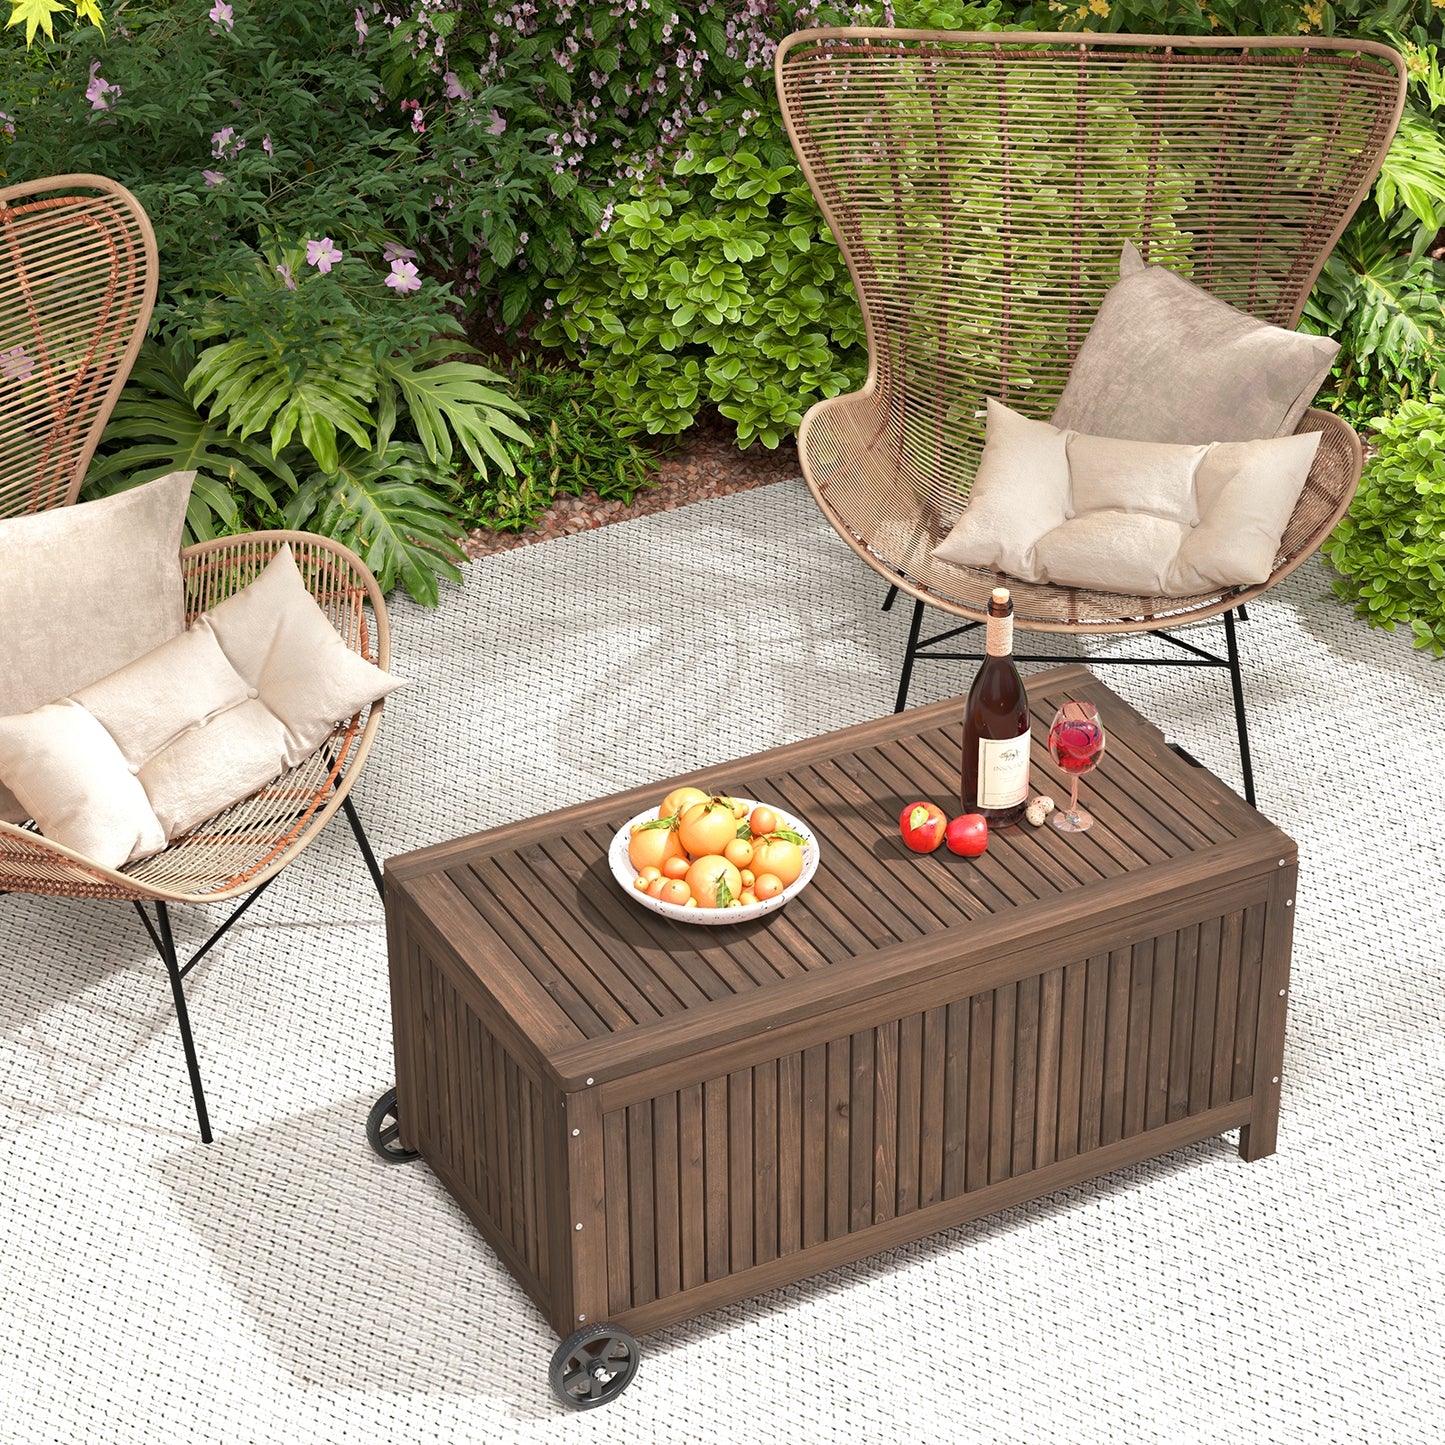 56-Gallon Wood Deck Box with Removable Waterproof PE Liner-Brown